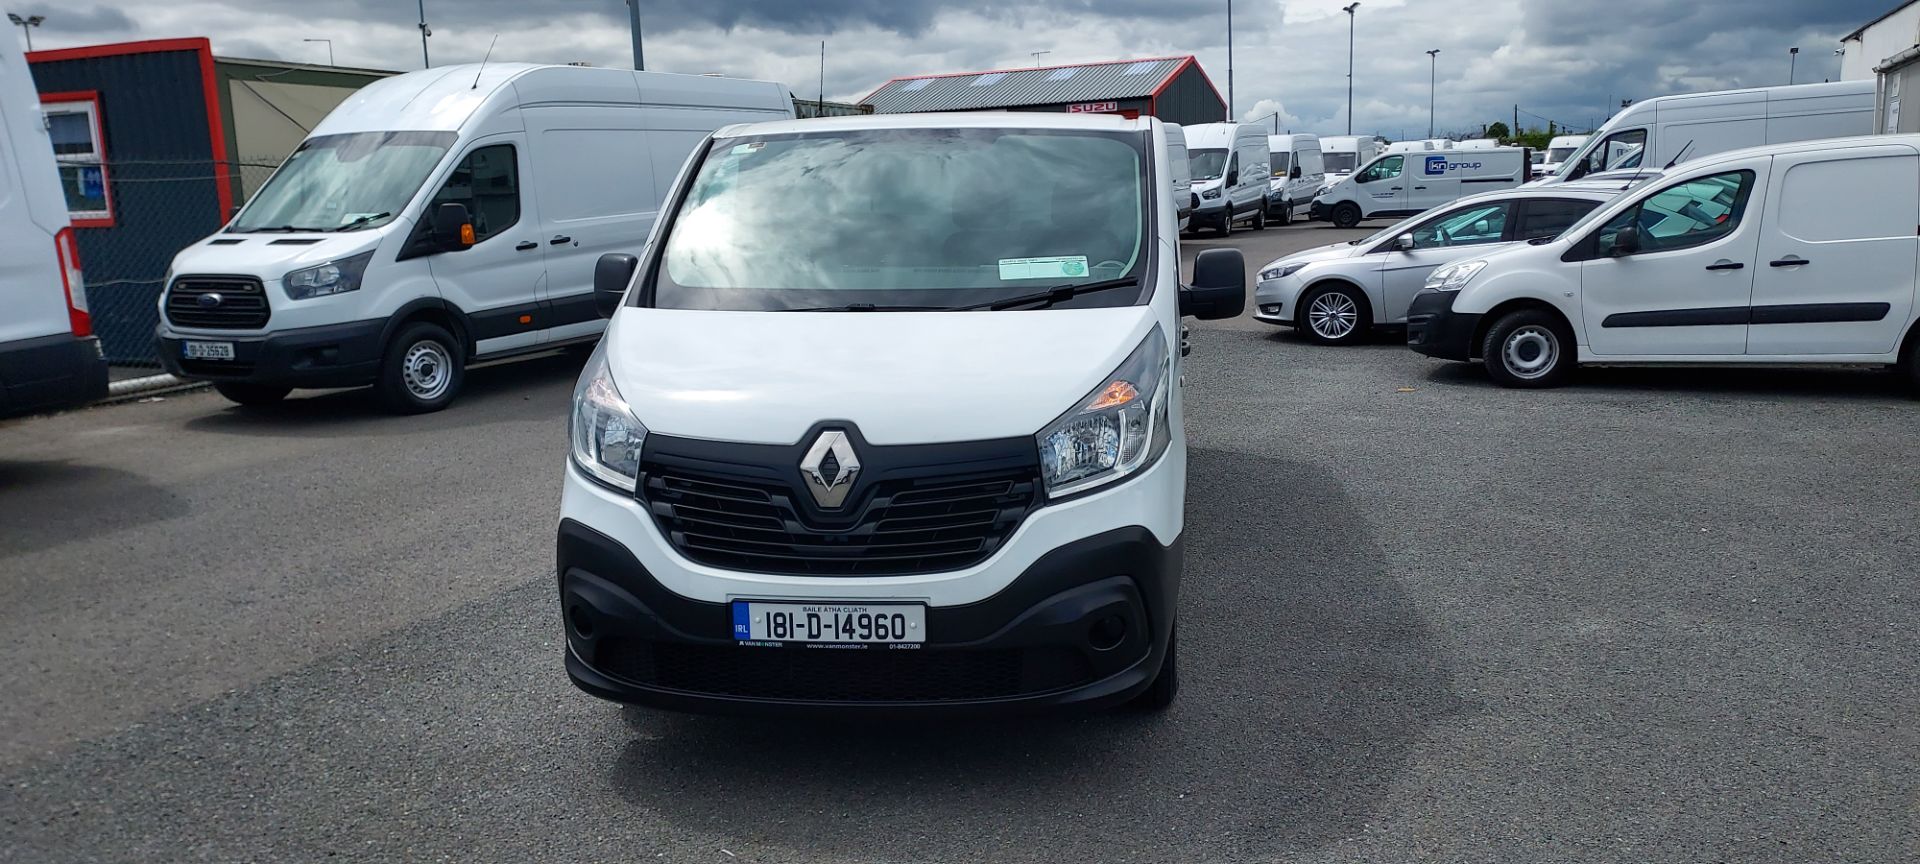 2018 Renault Trafic LL29 DCI 120 Business 3DR (181D14960) Thumbnail 2